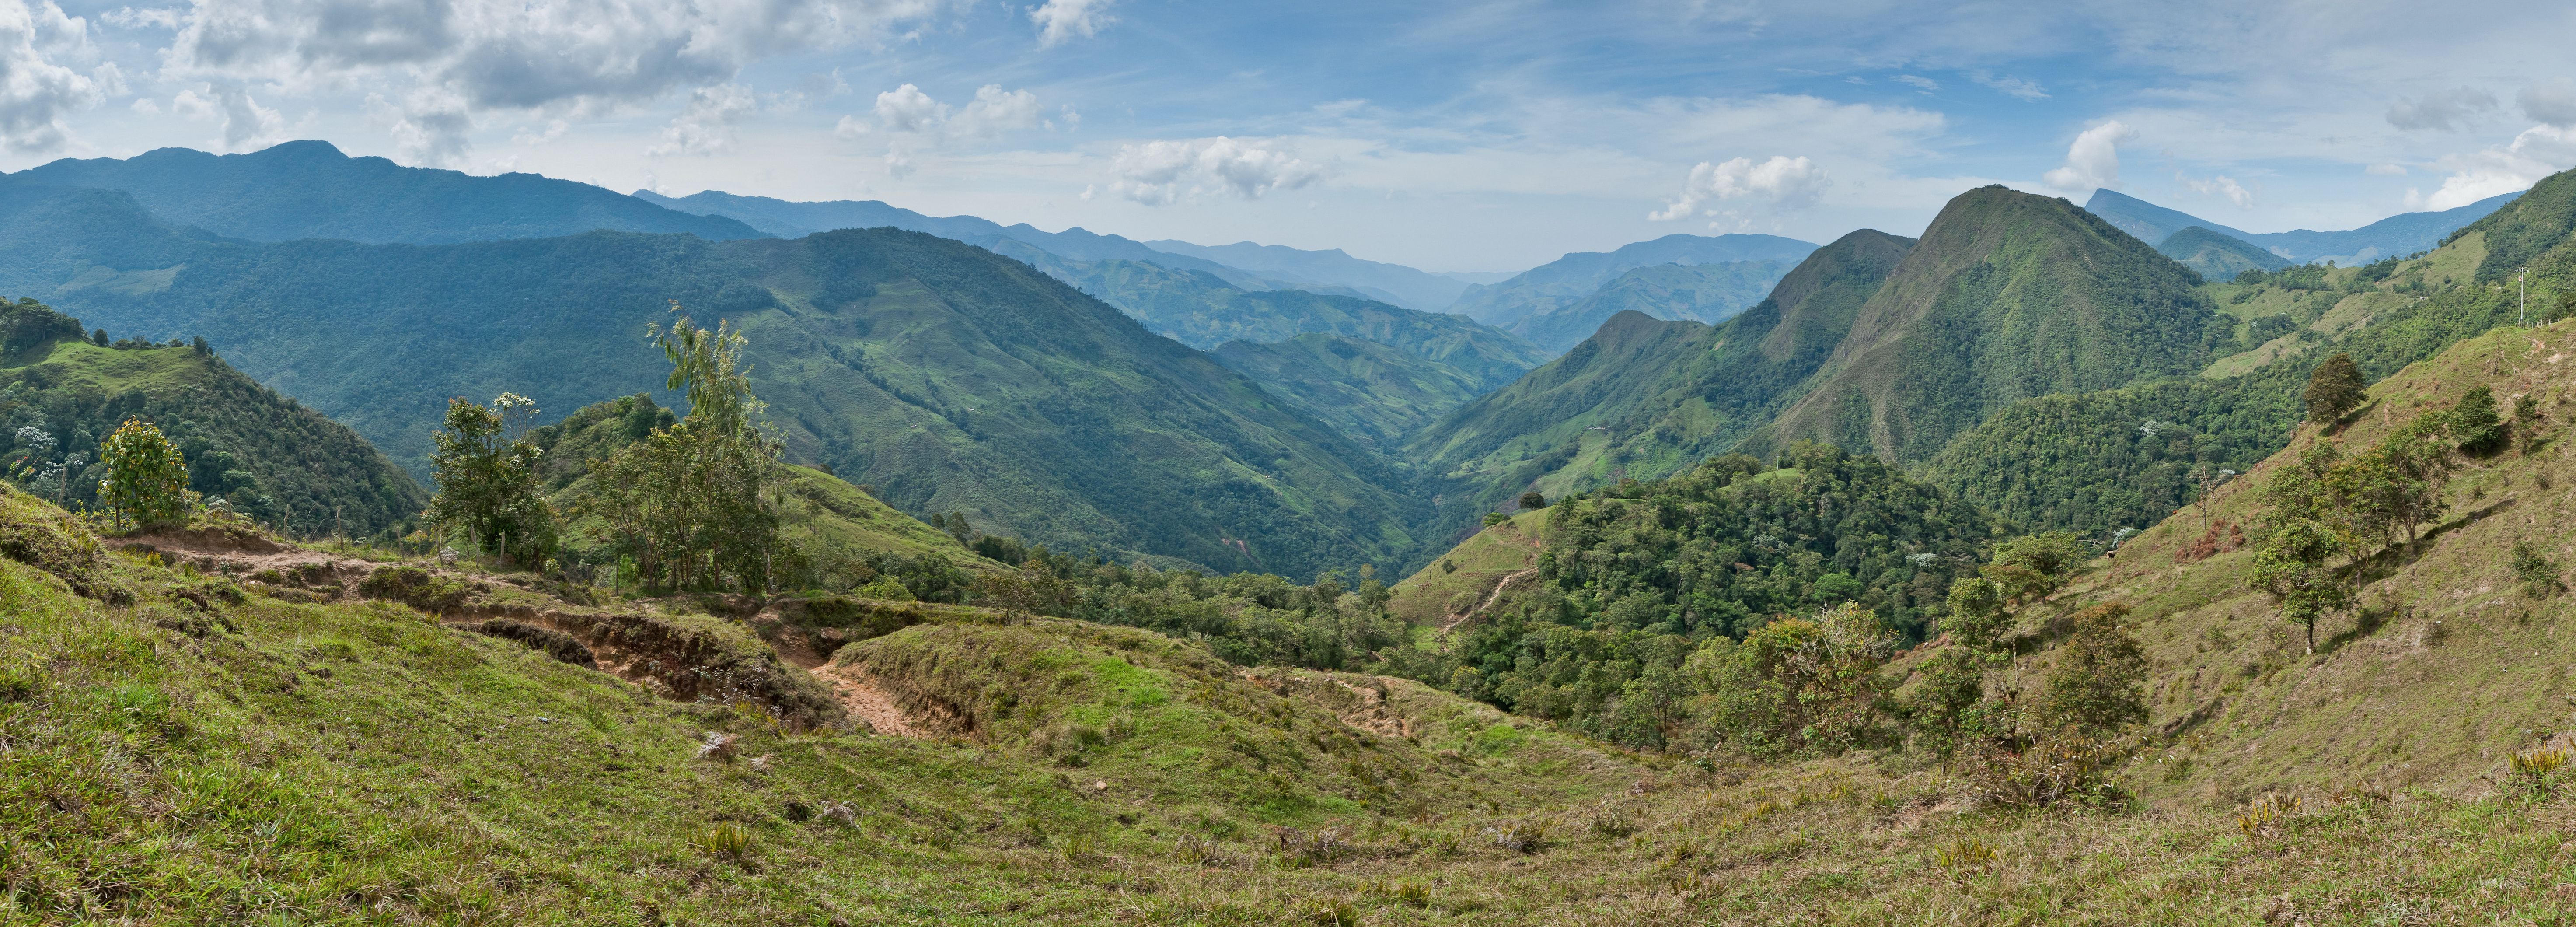 File:Andes mountains panoramic view.jpg - Wikimedia Commons